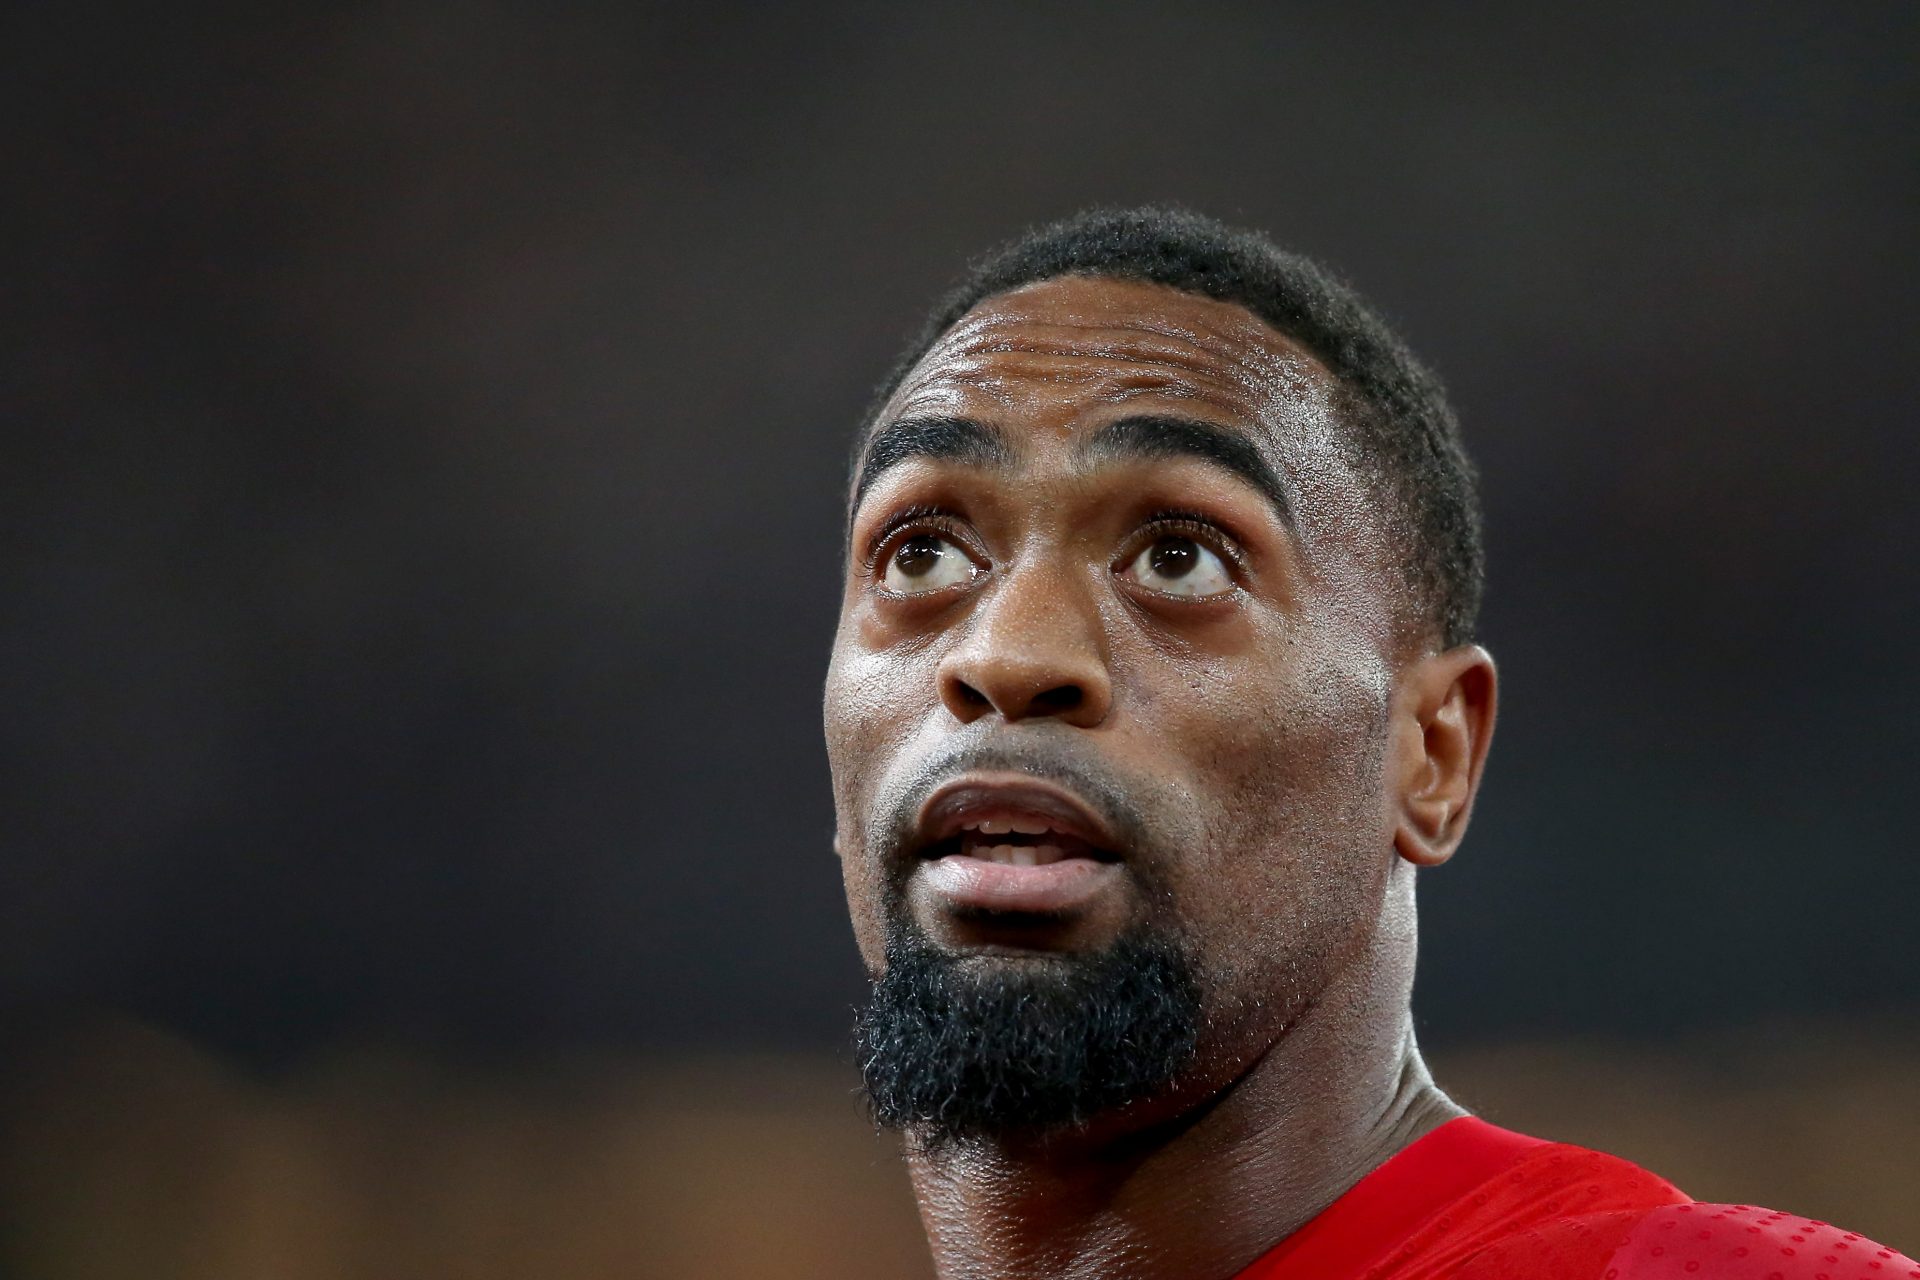 The tragic story of Tyson Gay, the second fastest man in history